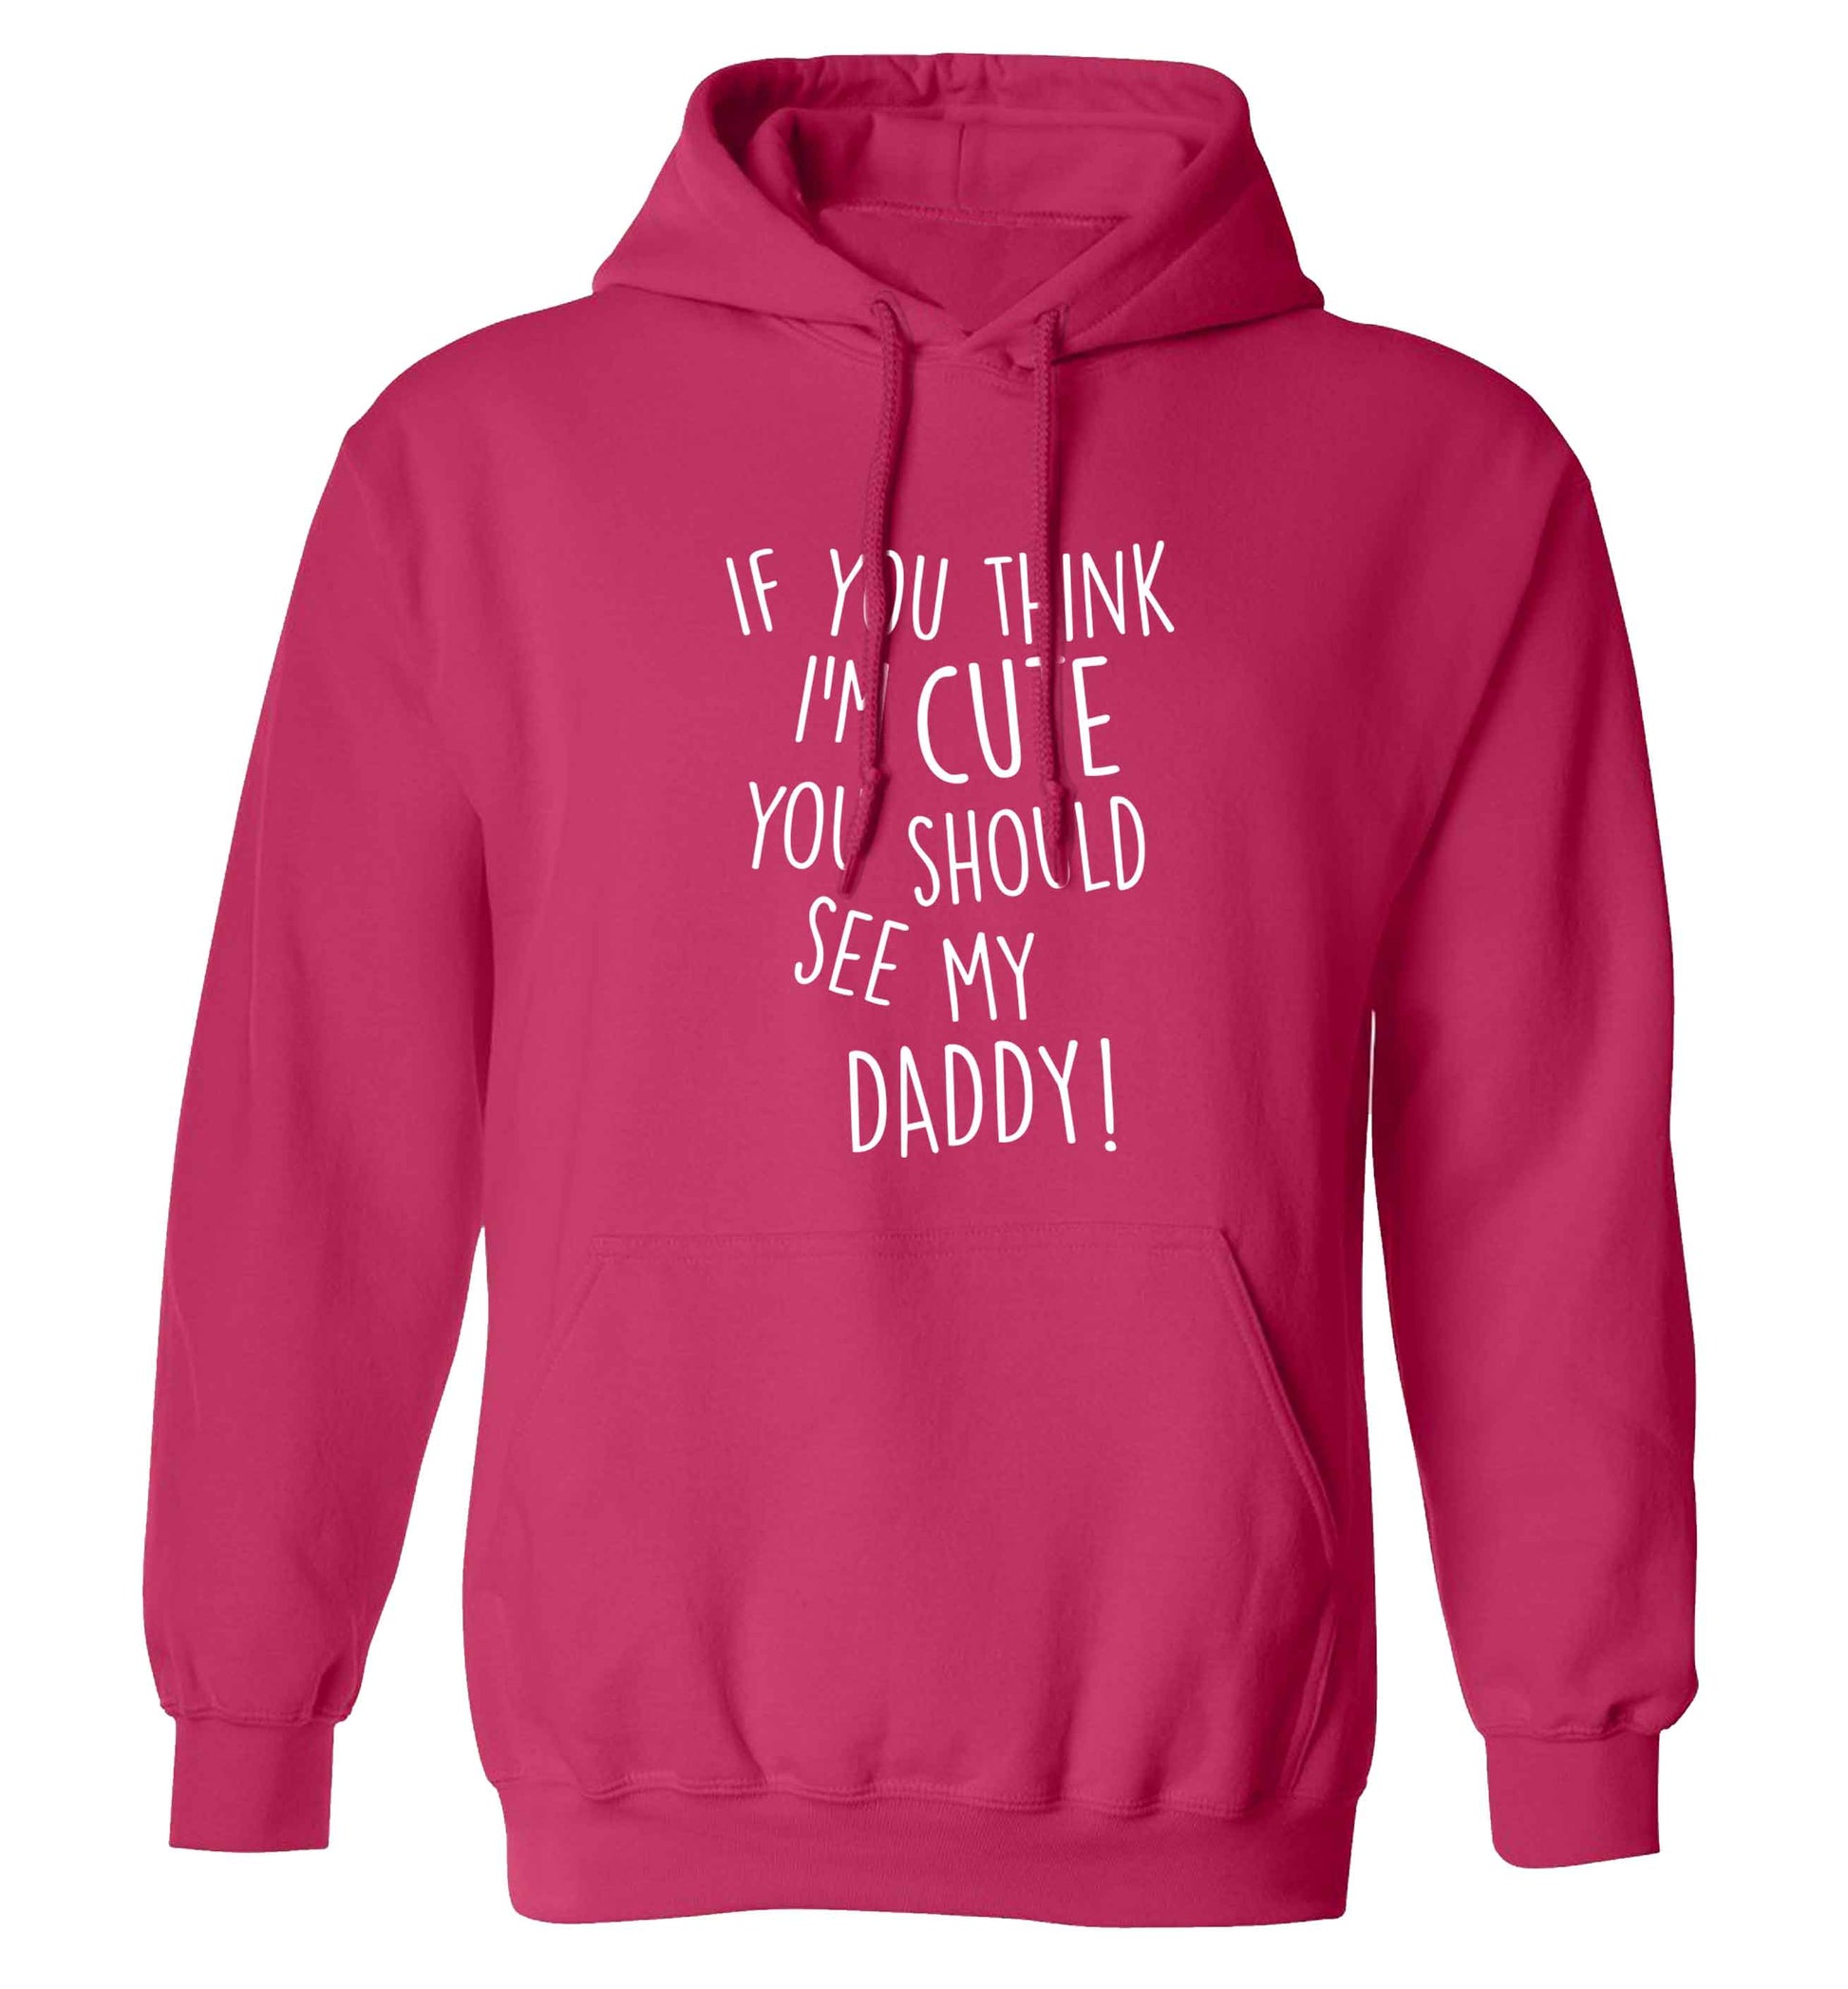 If you think I'm cute you should see my daddy adults unisex pink hoodie 2XL